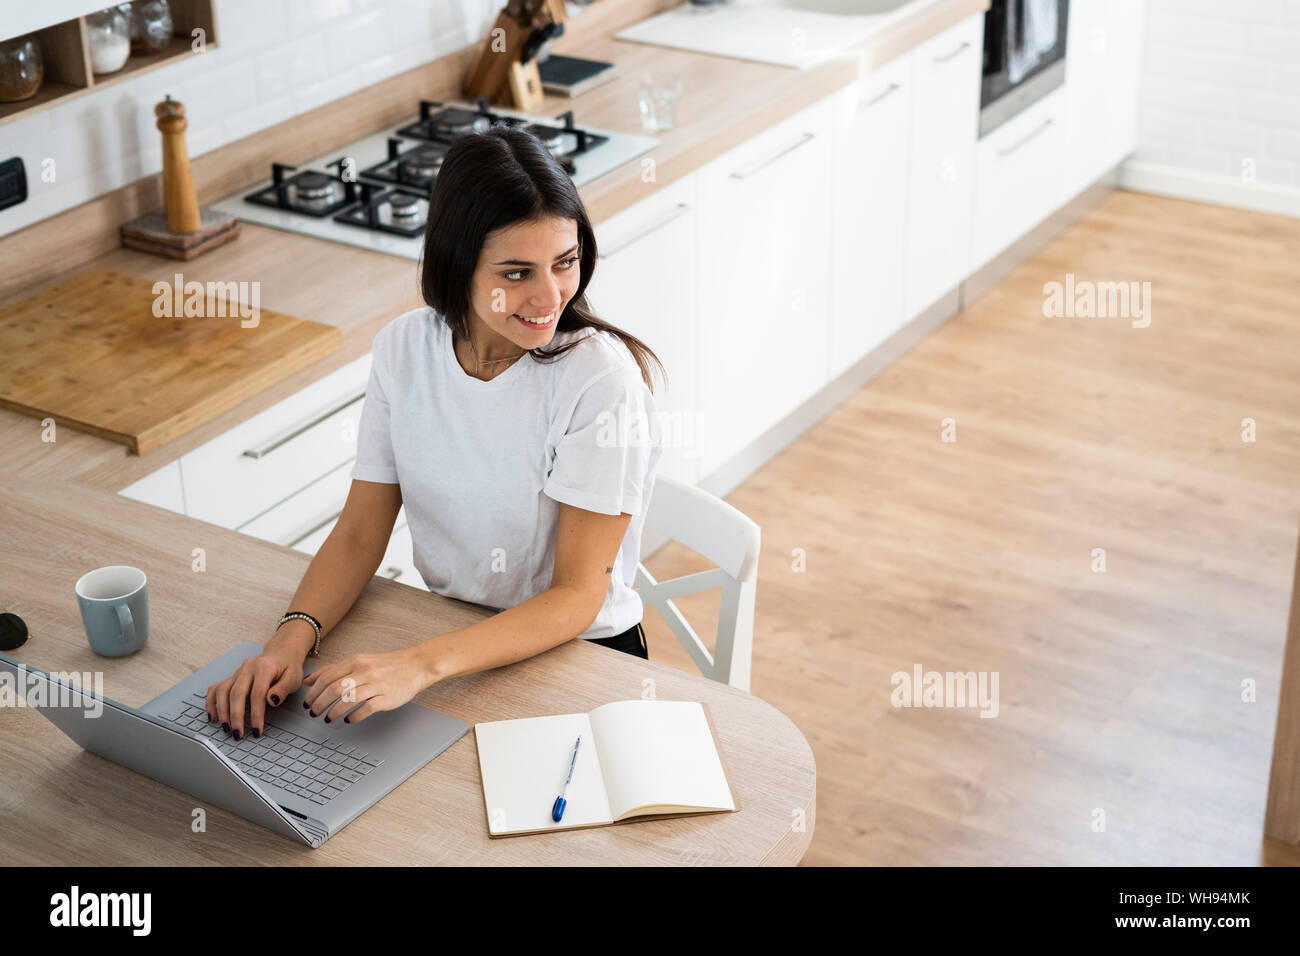 Smiling young woman using laptop at home Stock Photo